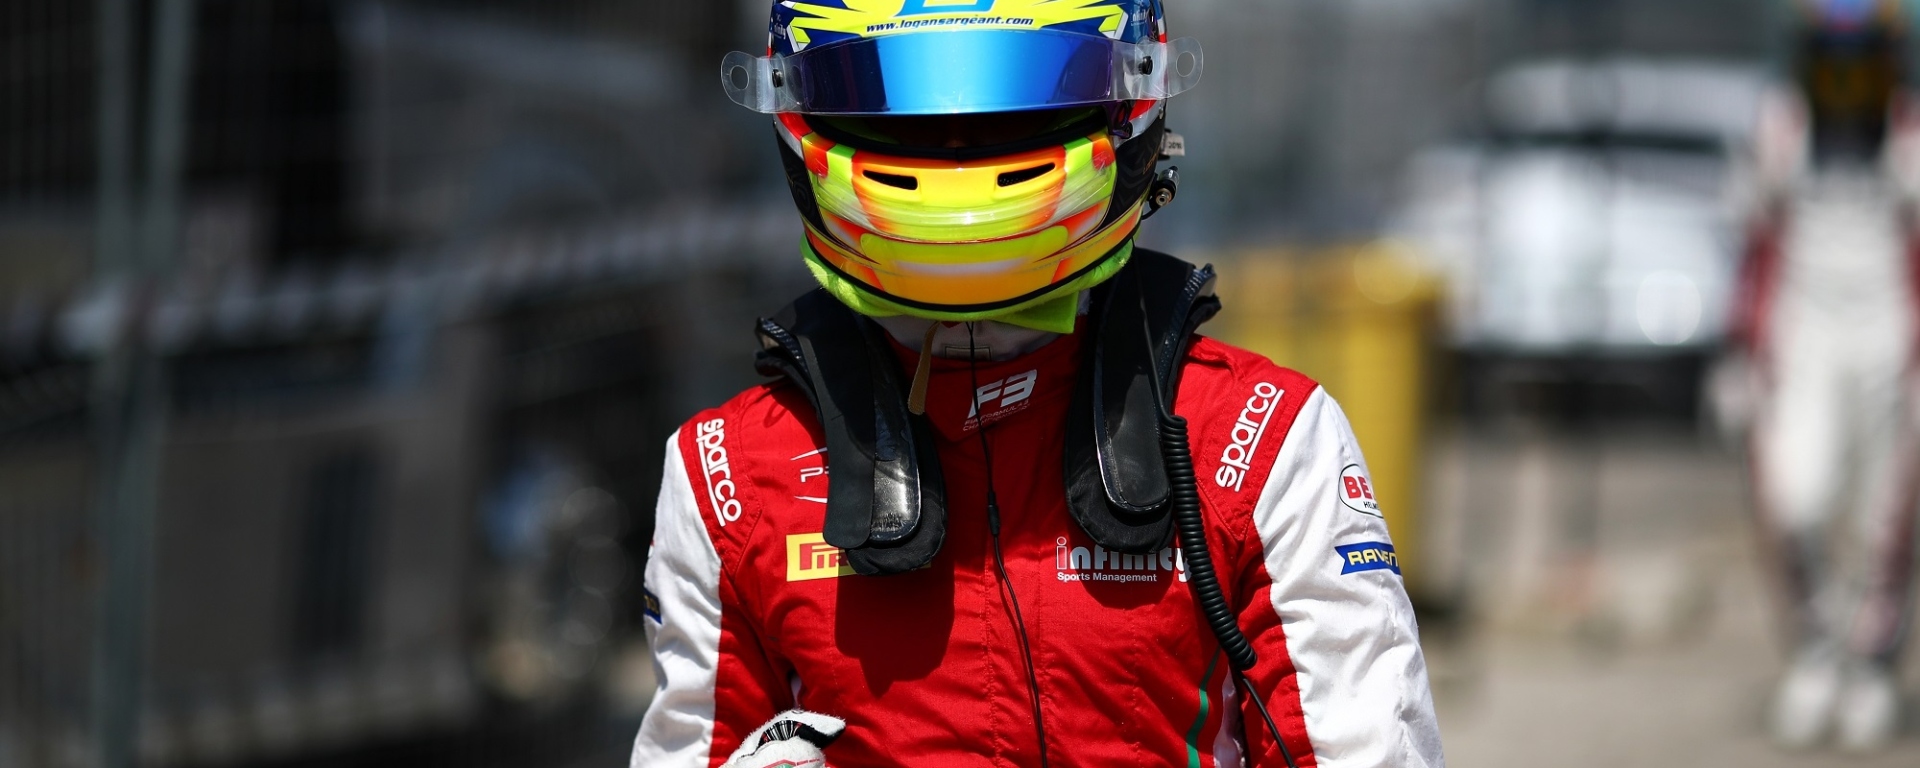 A racing driver in a red and white race suit and a yellow and blue racing helmet pumps his right fist